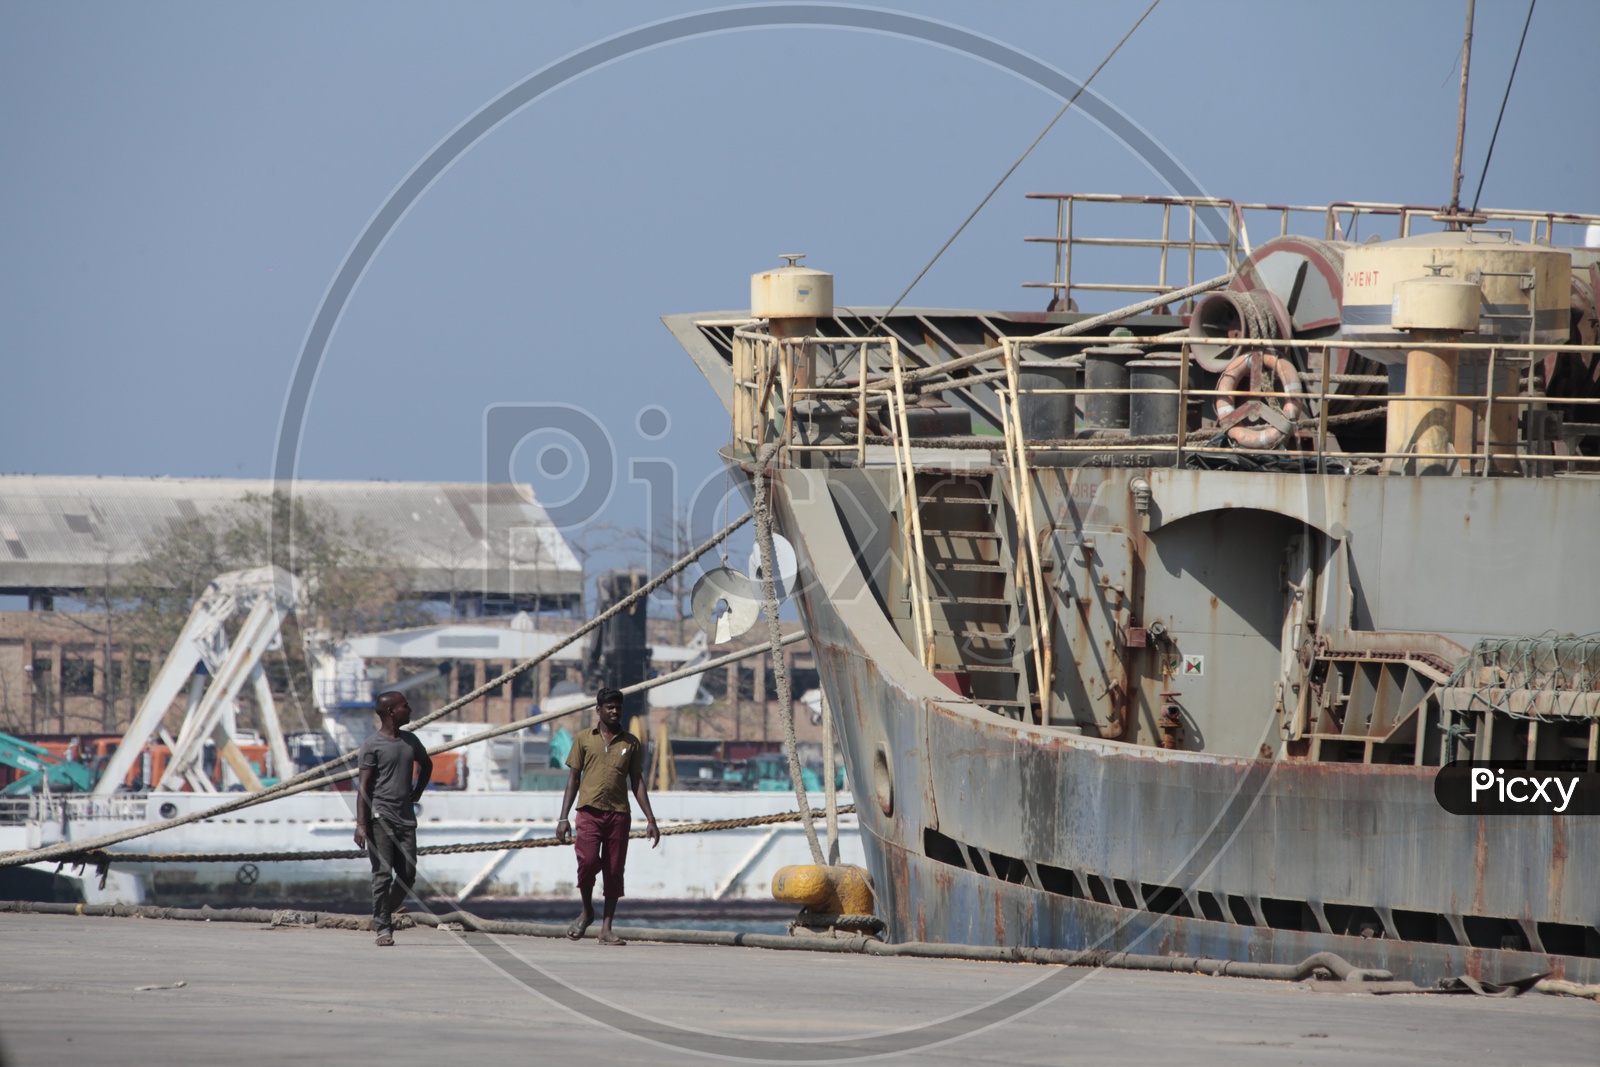 Local people walking alongside the ship by the port area